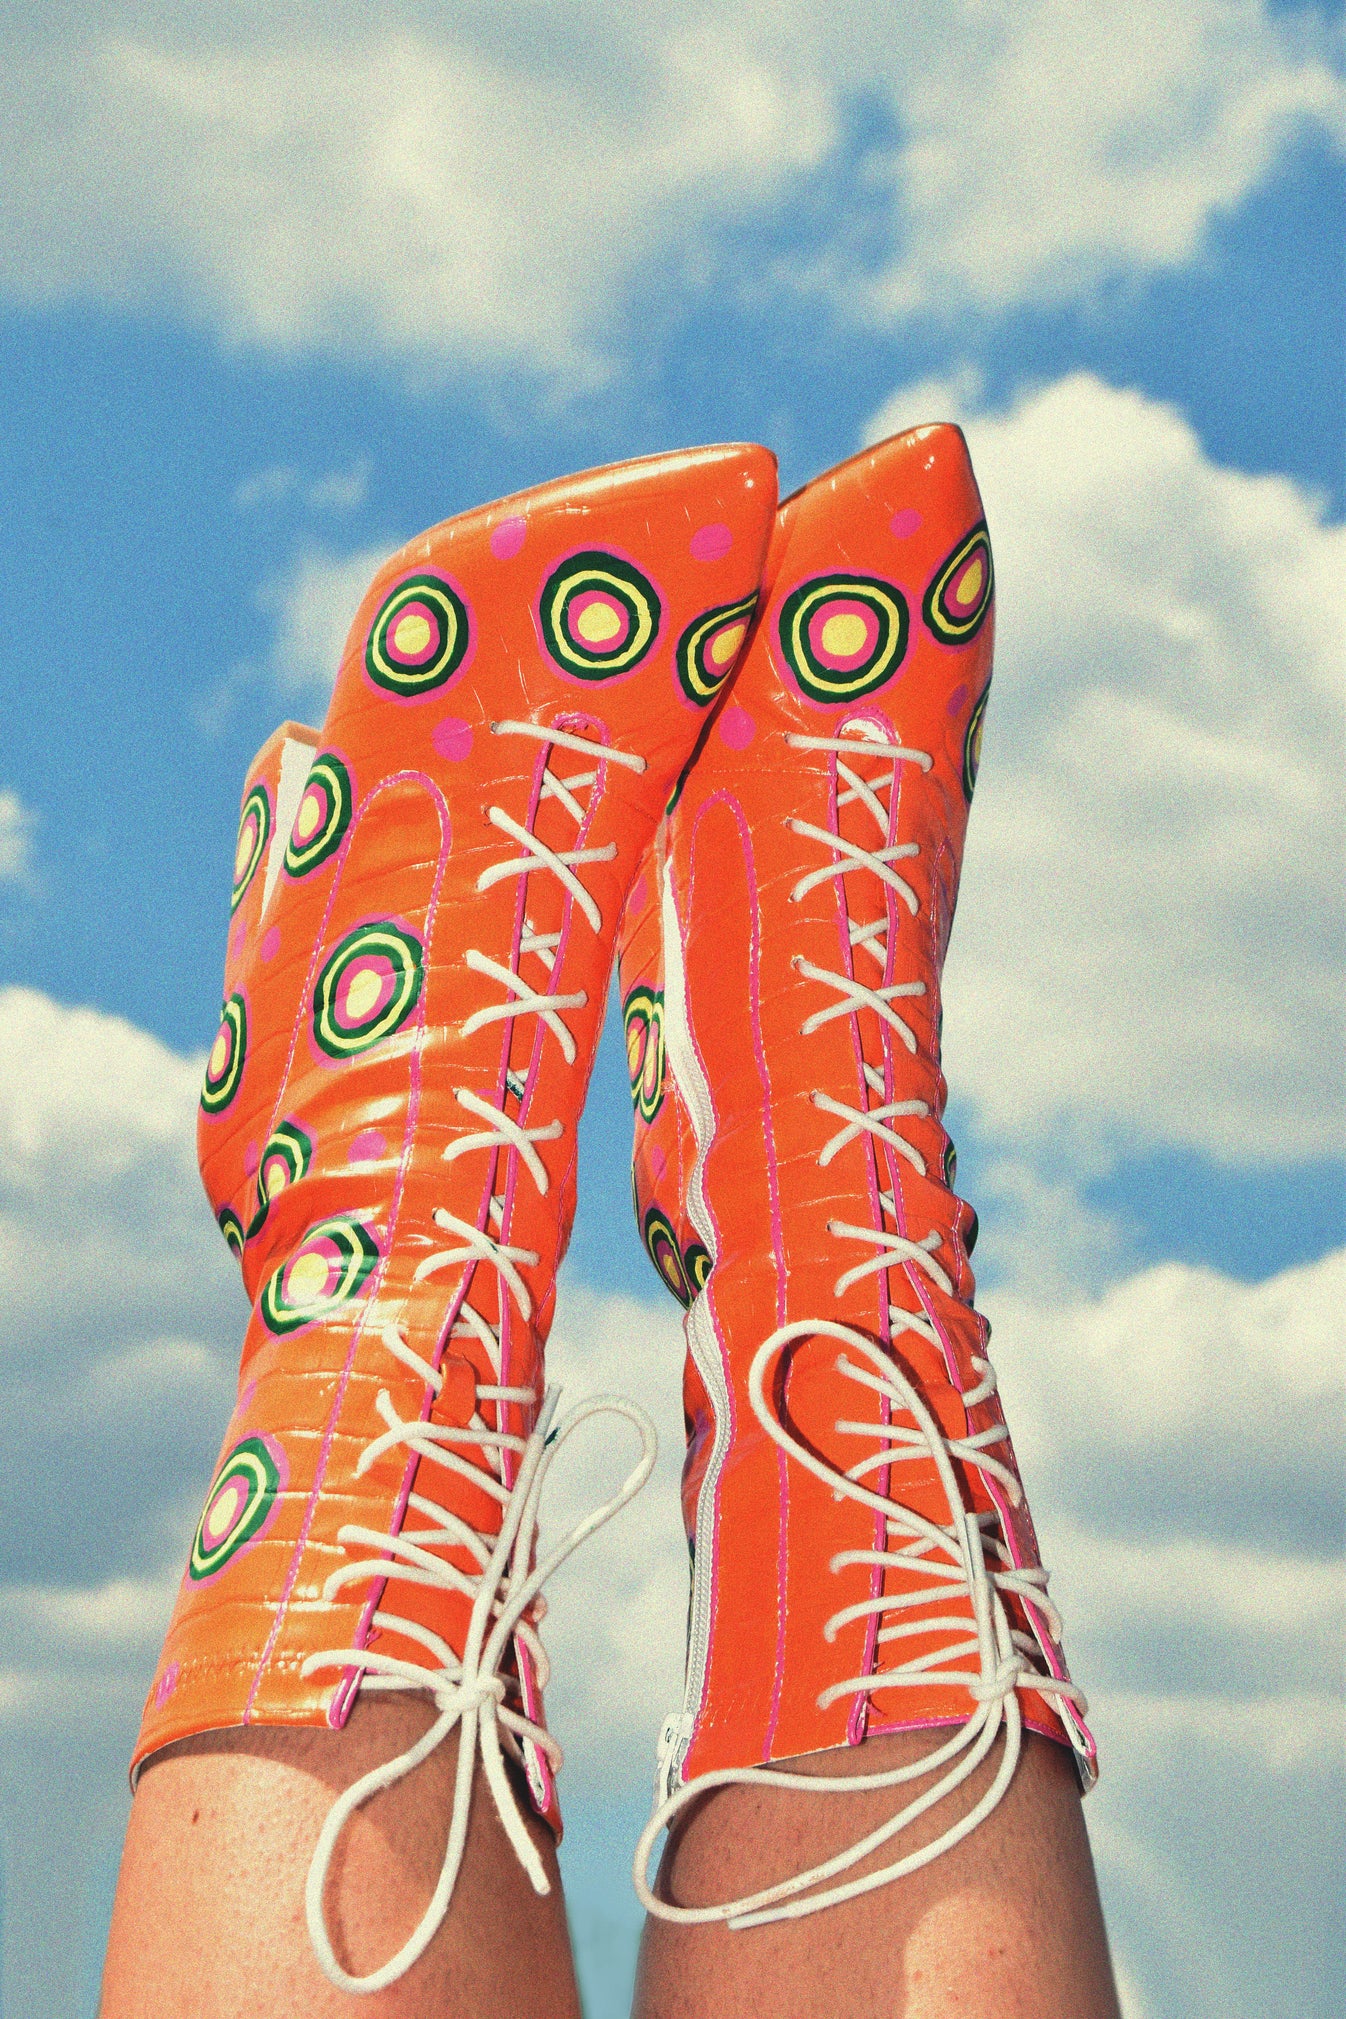 “Creamsicle” tie up boots – Girlscoutshoes